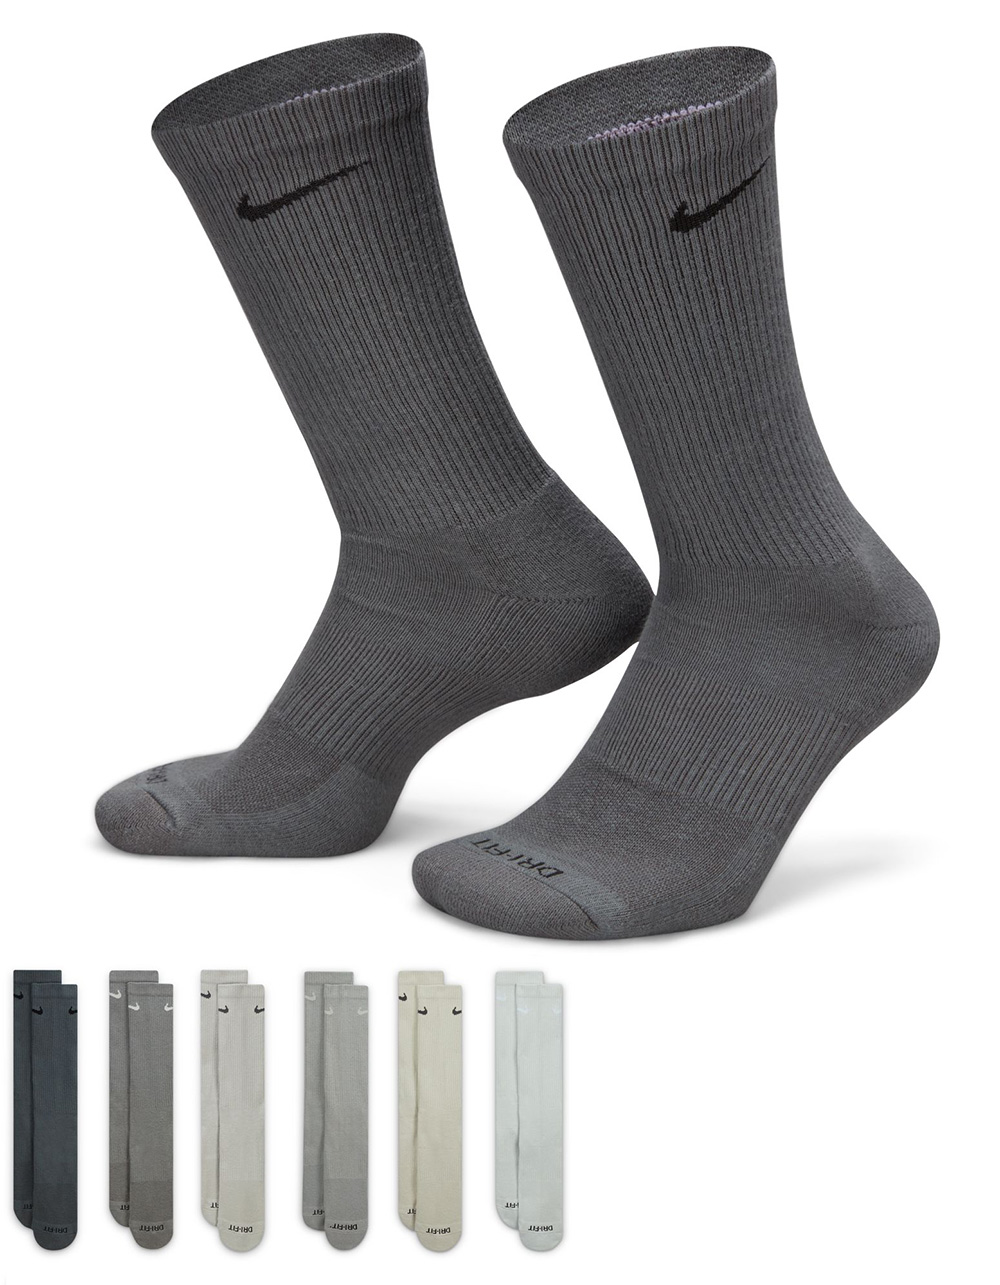 NIKE Everyday Plus Cushioned 6 Pack Crew Socks - GRAY COMBO | Tillys